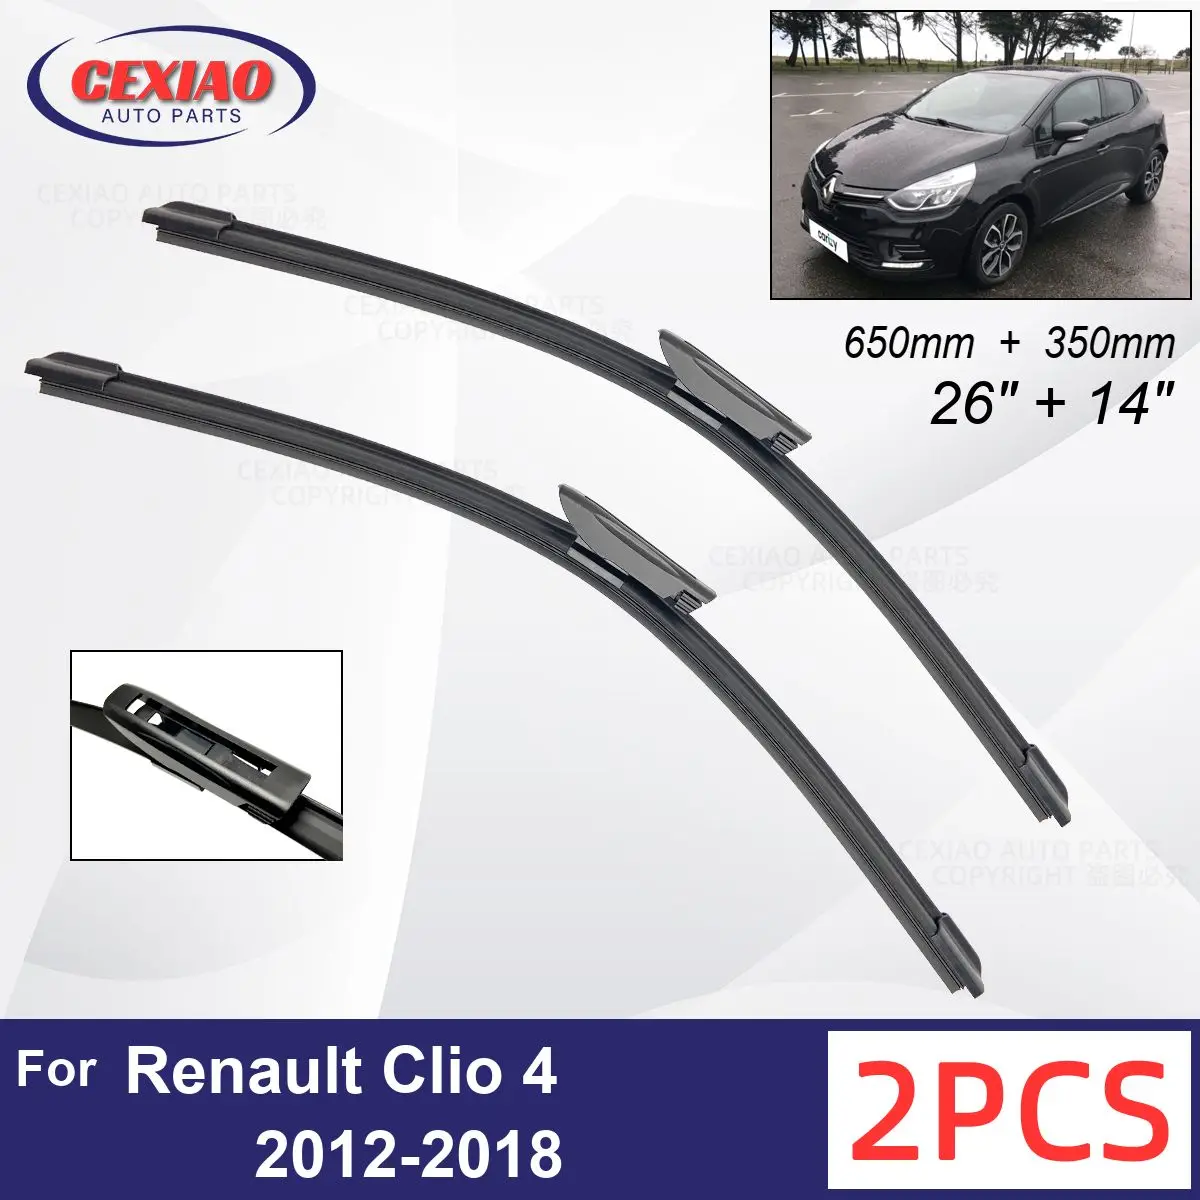 

Car Wiper For Renault Clio 4 2012-2018 Front Wiper Blades Soft Rubber Windscreen Wipers Auto Windshield 26" 14" 650mm 350mm